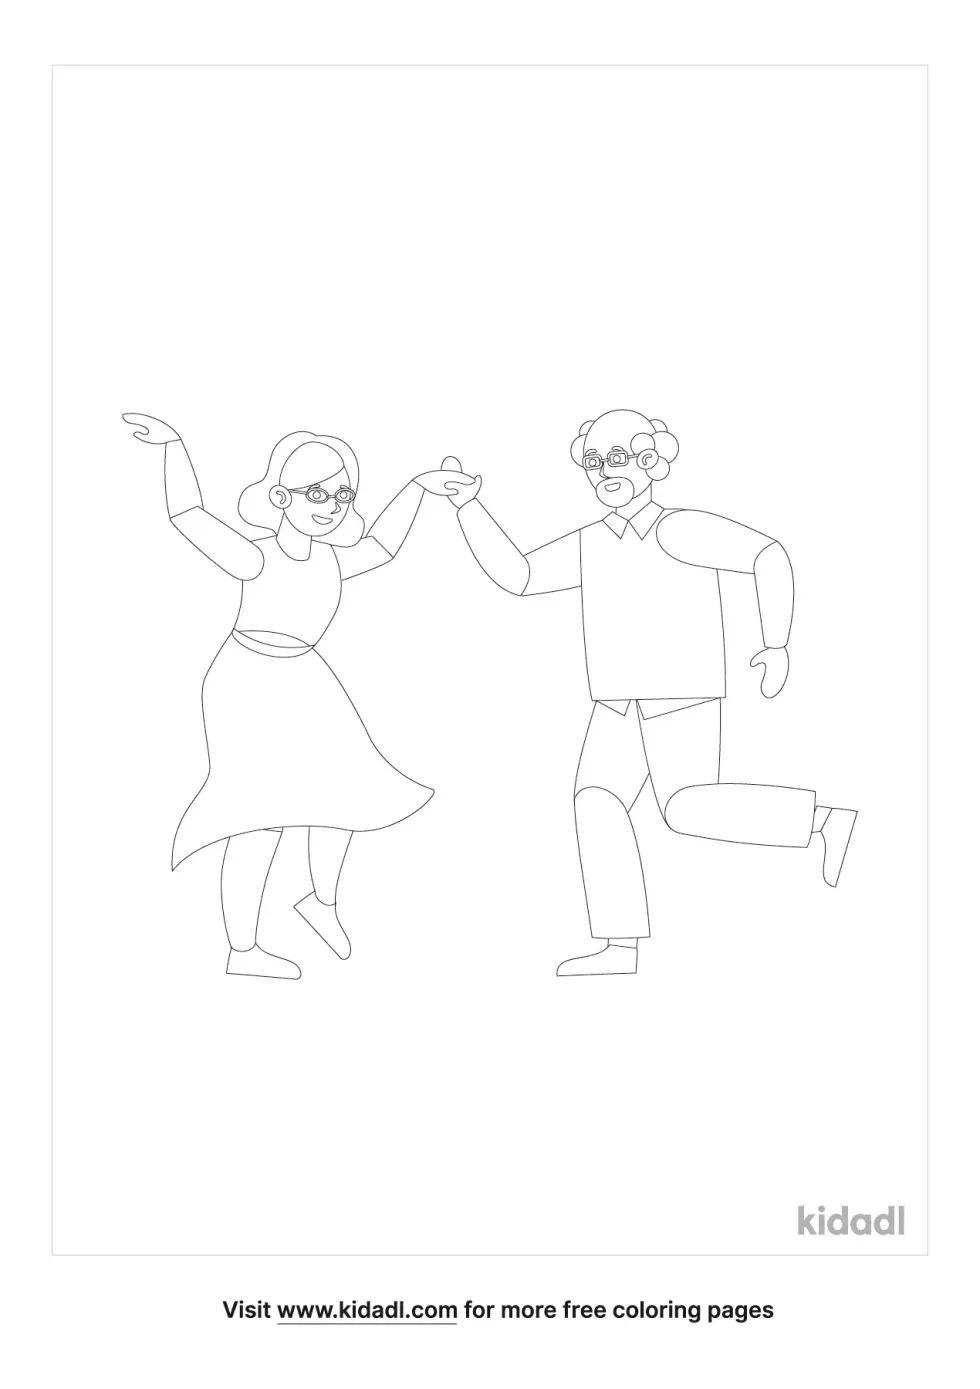 Old Couples Dancing Coloring Page